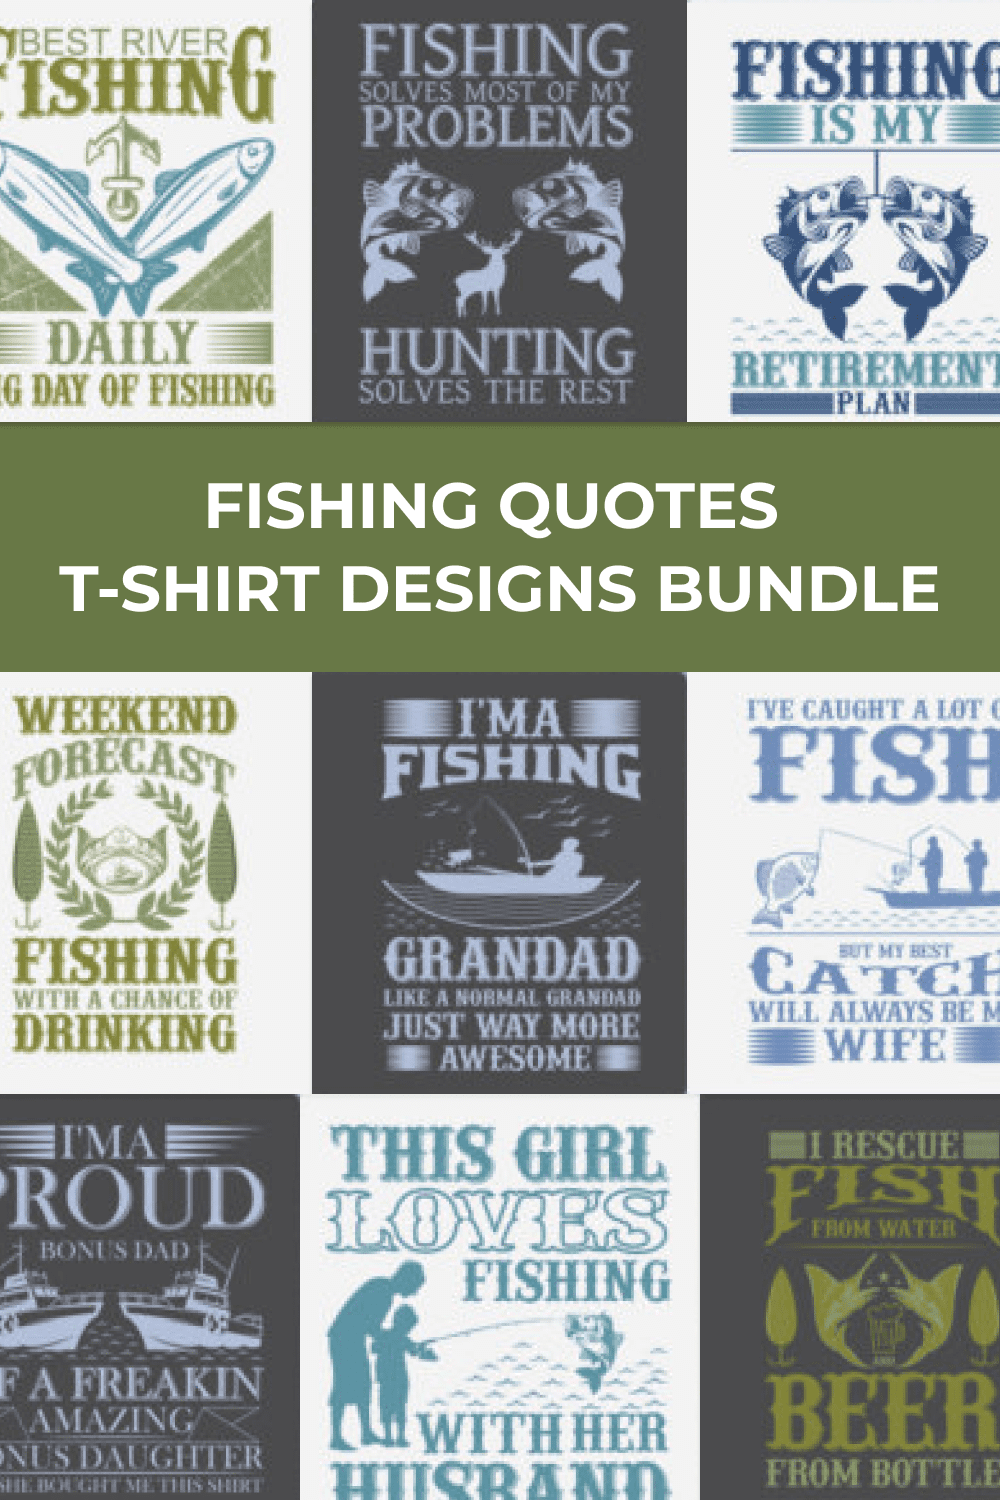 Various graphics about fishing in the form of posters.